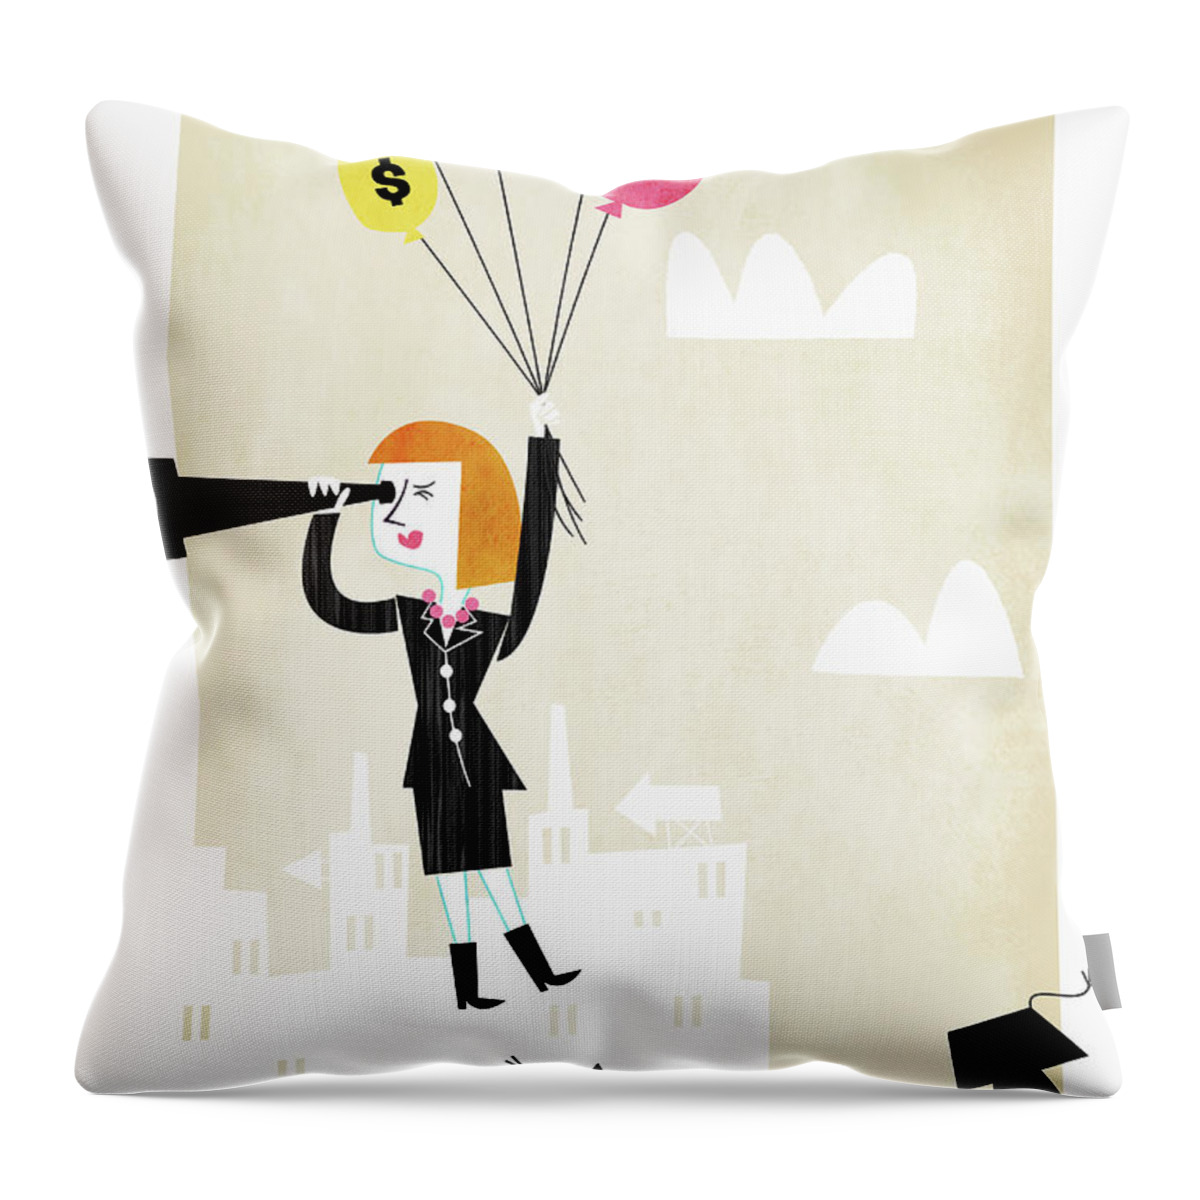 20-24 Years Throw Pillow featuring the photograph Graduate Student Rising In Mid-air by Ikon Ikon Images